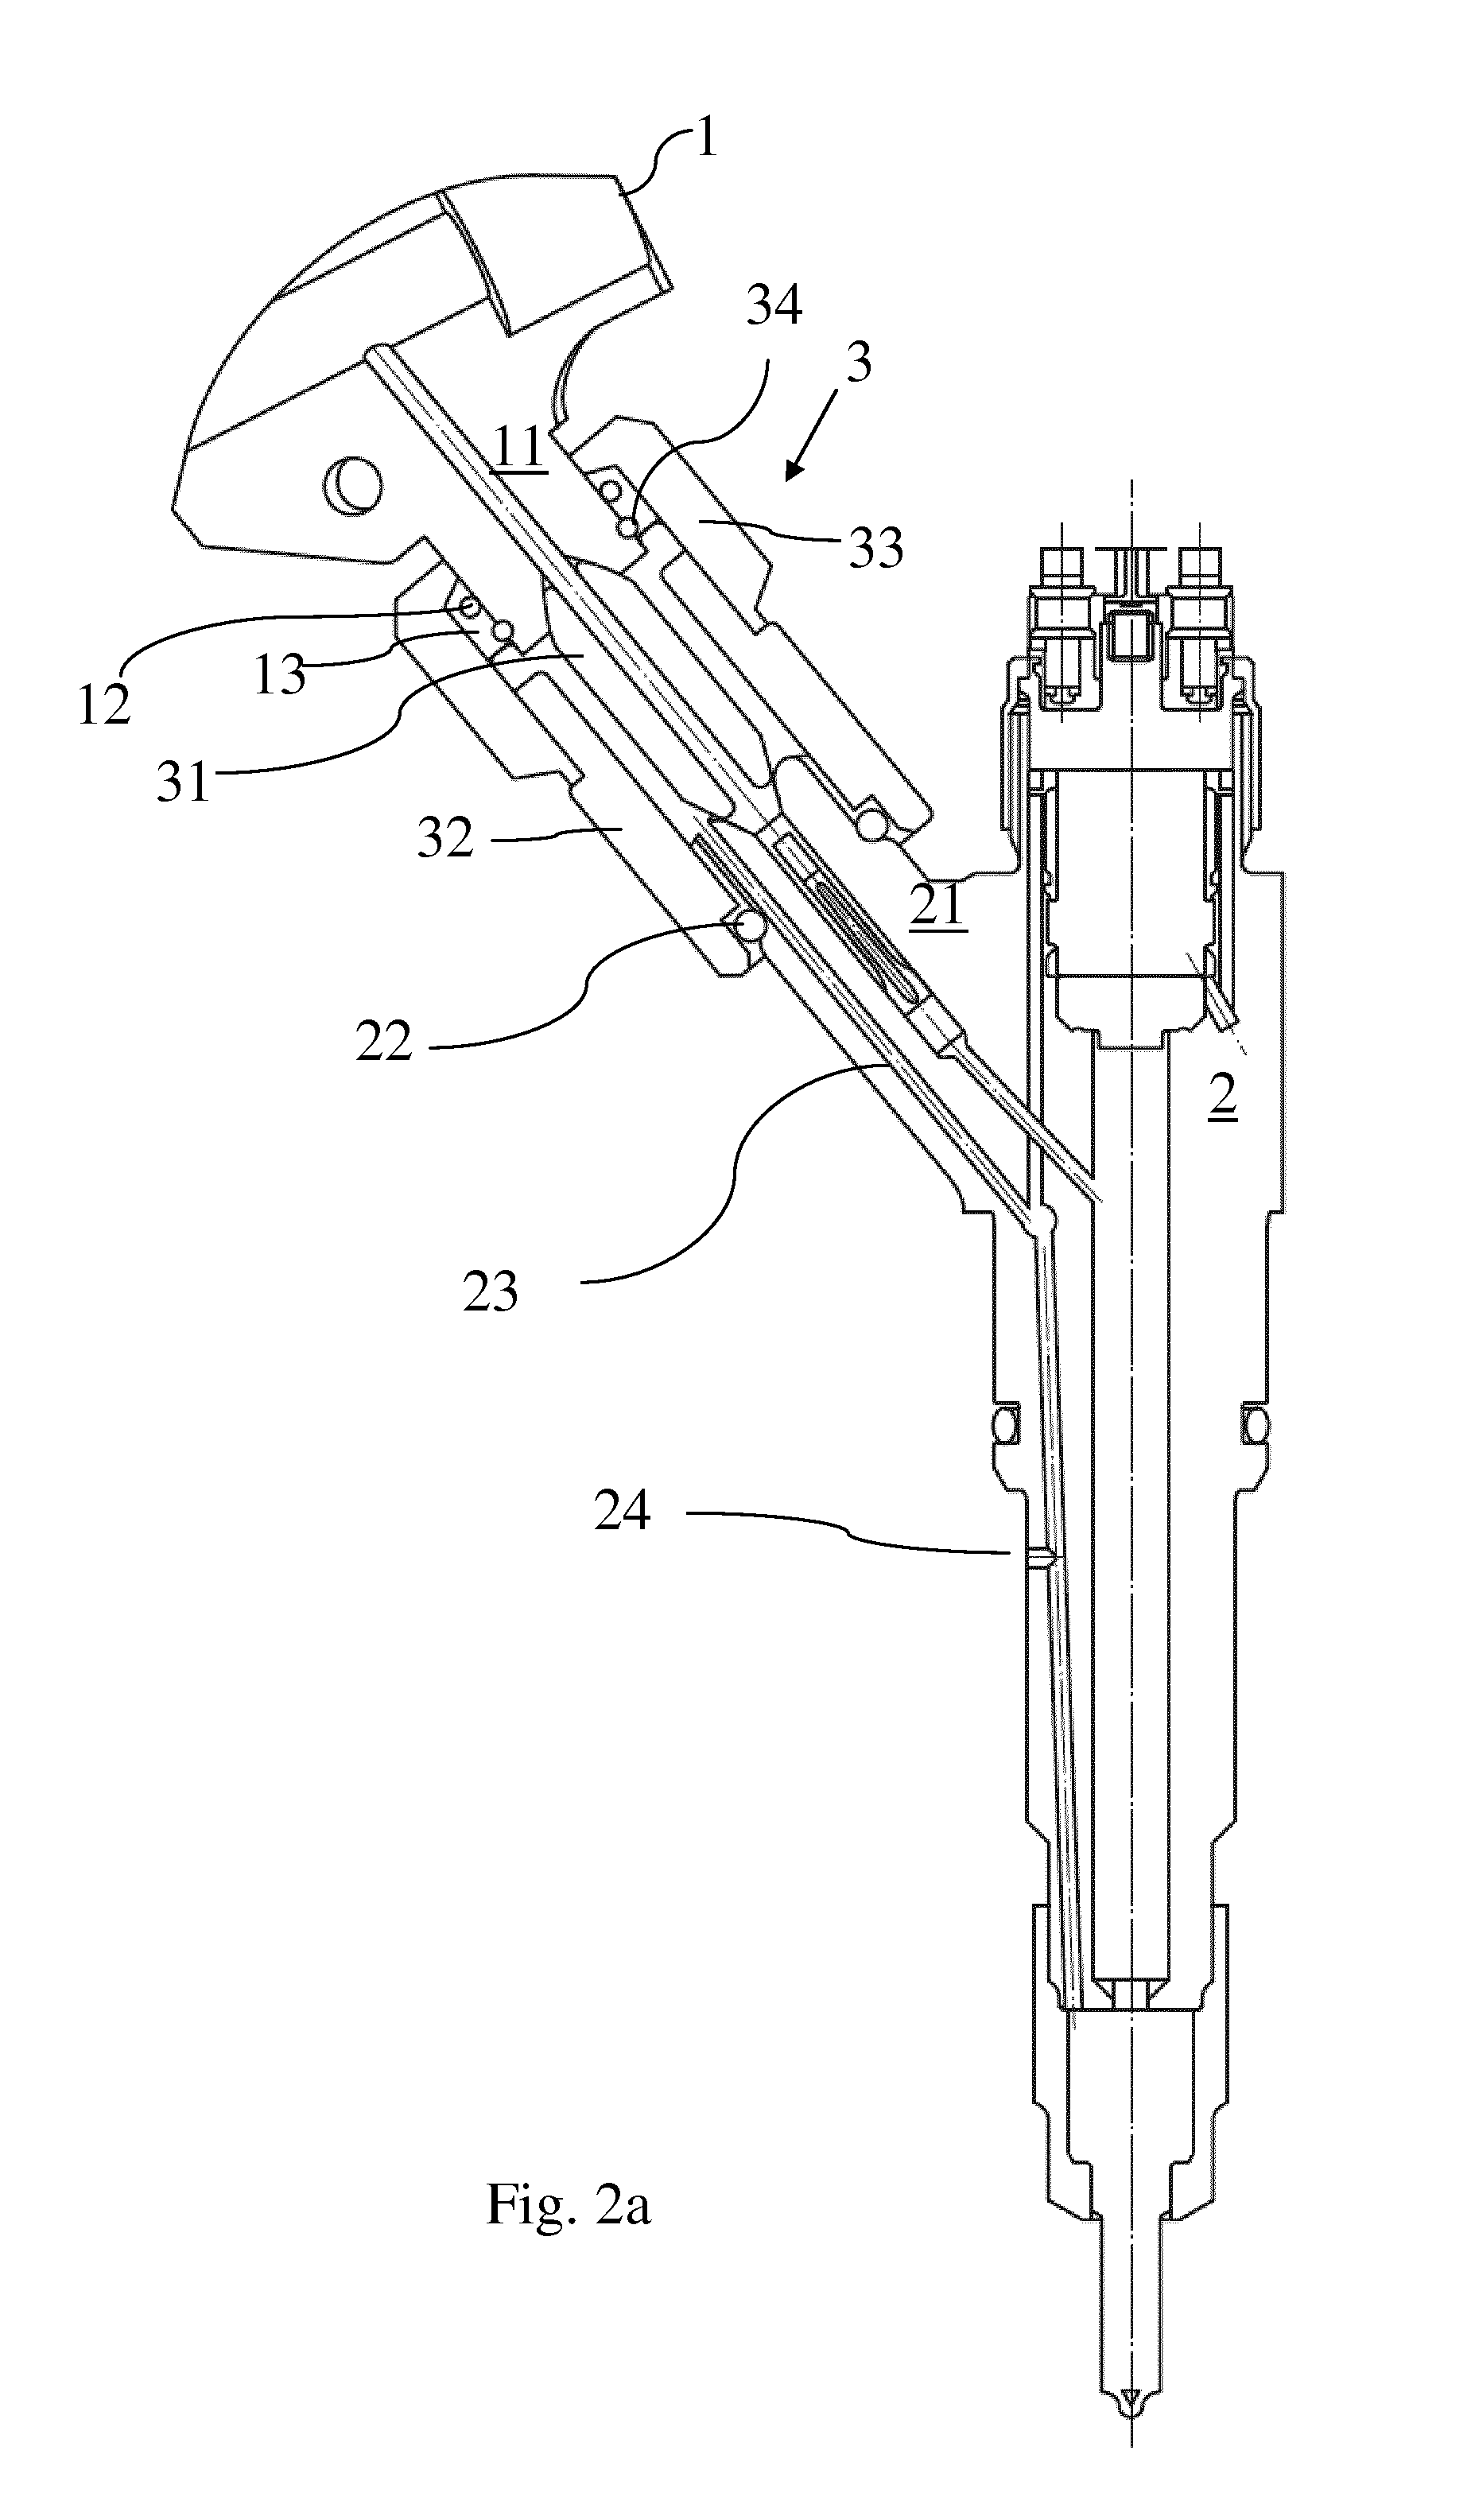 Fuel piping arrangement in common rail type fuel supply systems